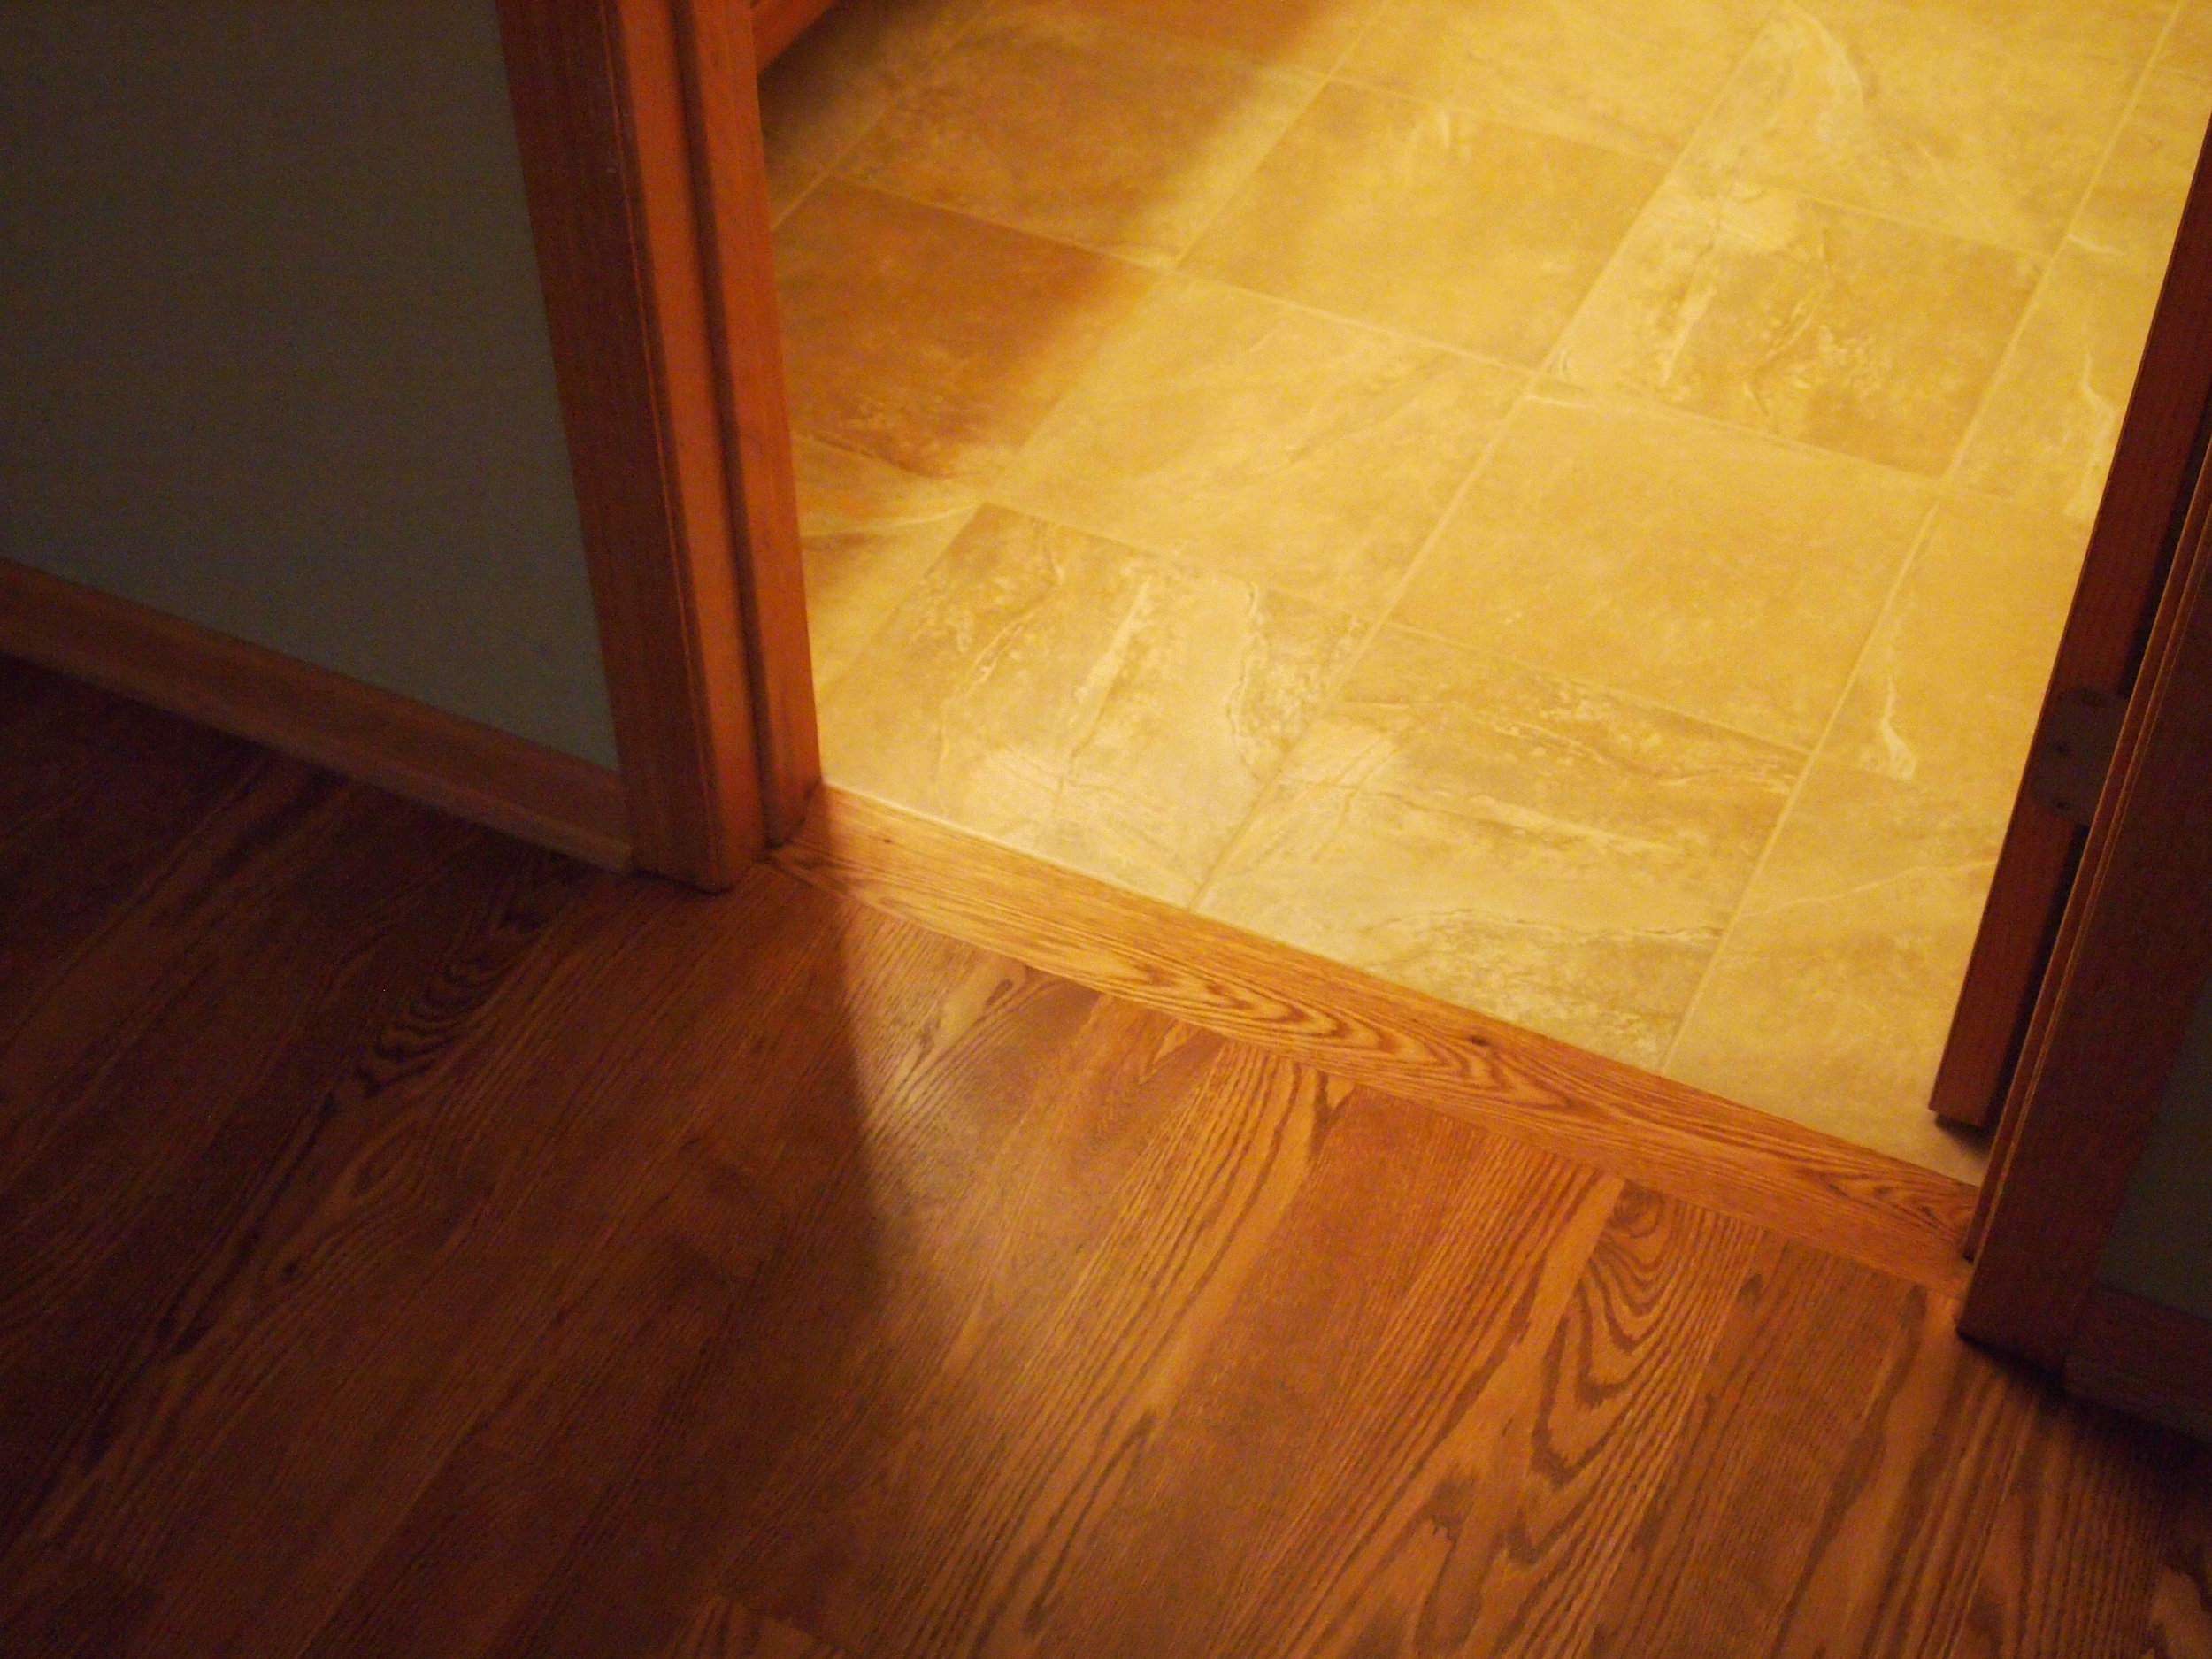 About Transition Flooring Concepts